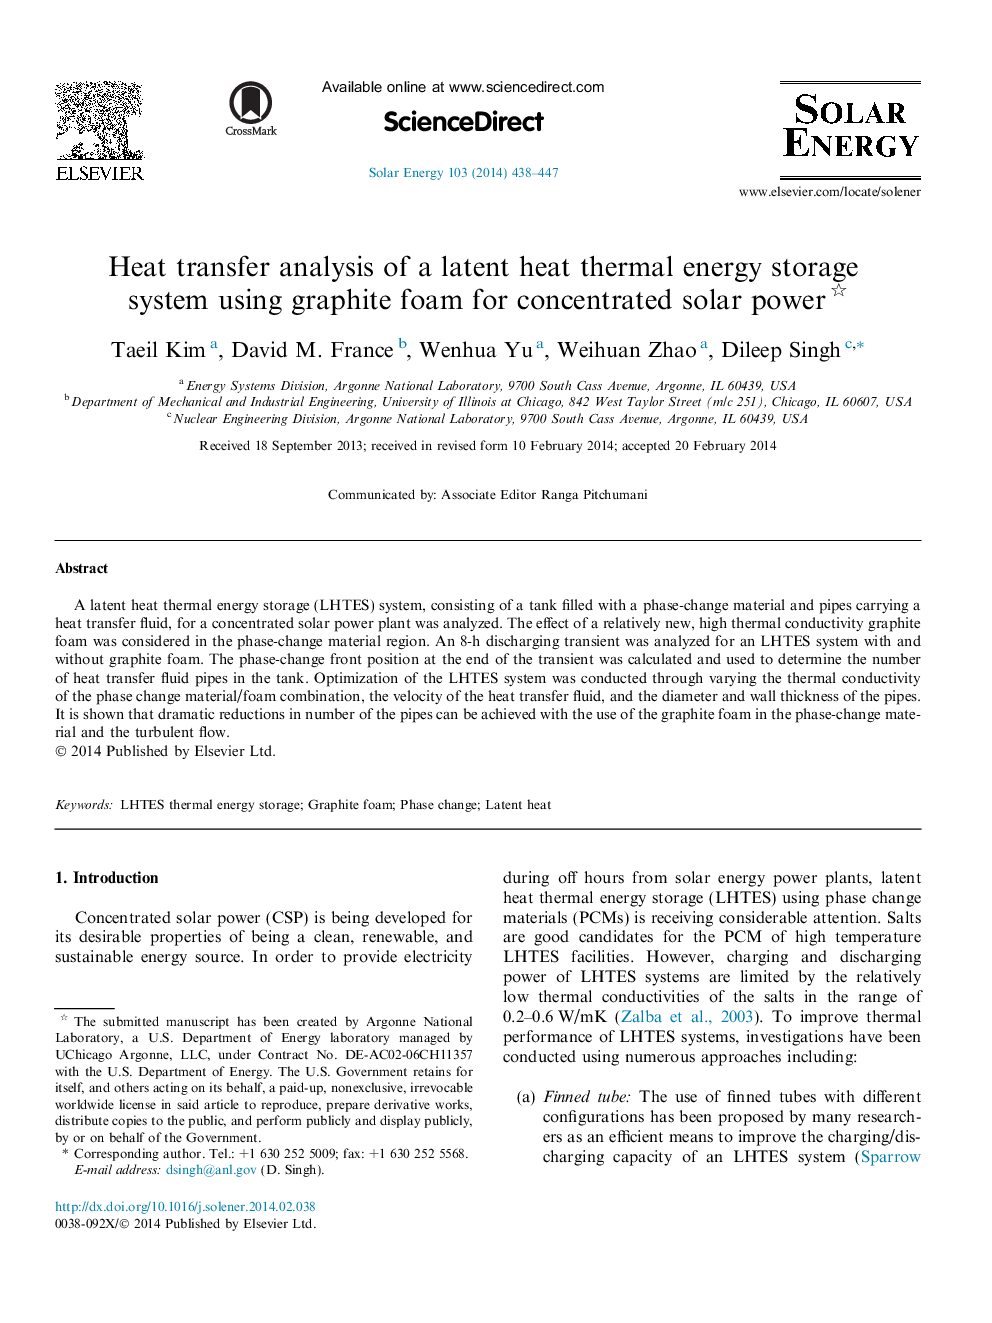 Heat transfer analysis of a latent heat thermal energy storage system using graphite foam for concentrated solar power